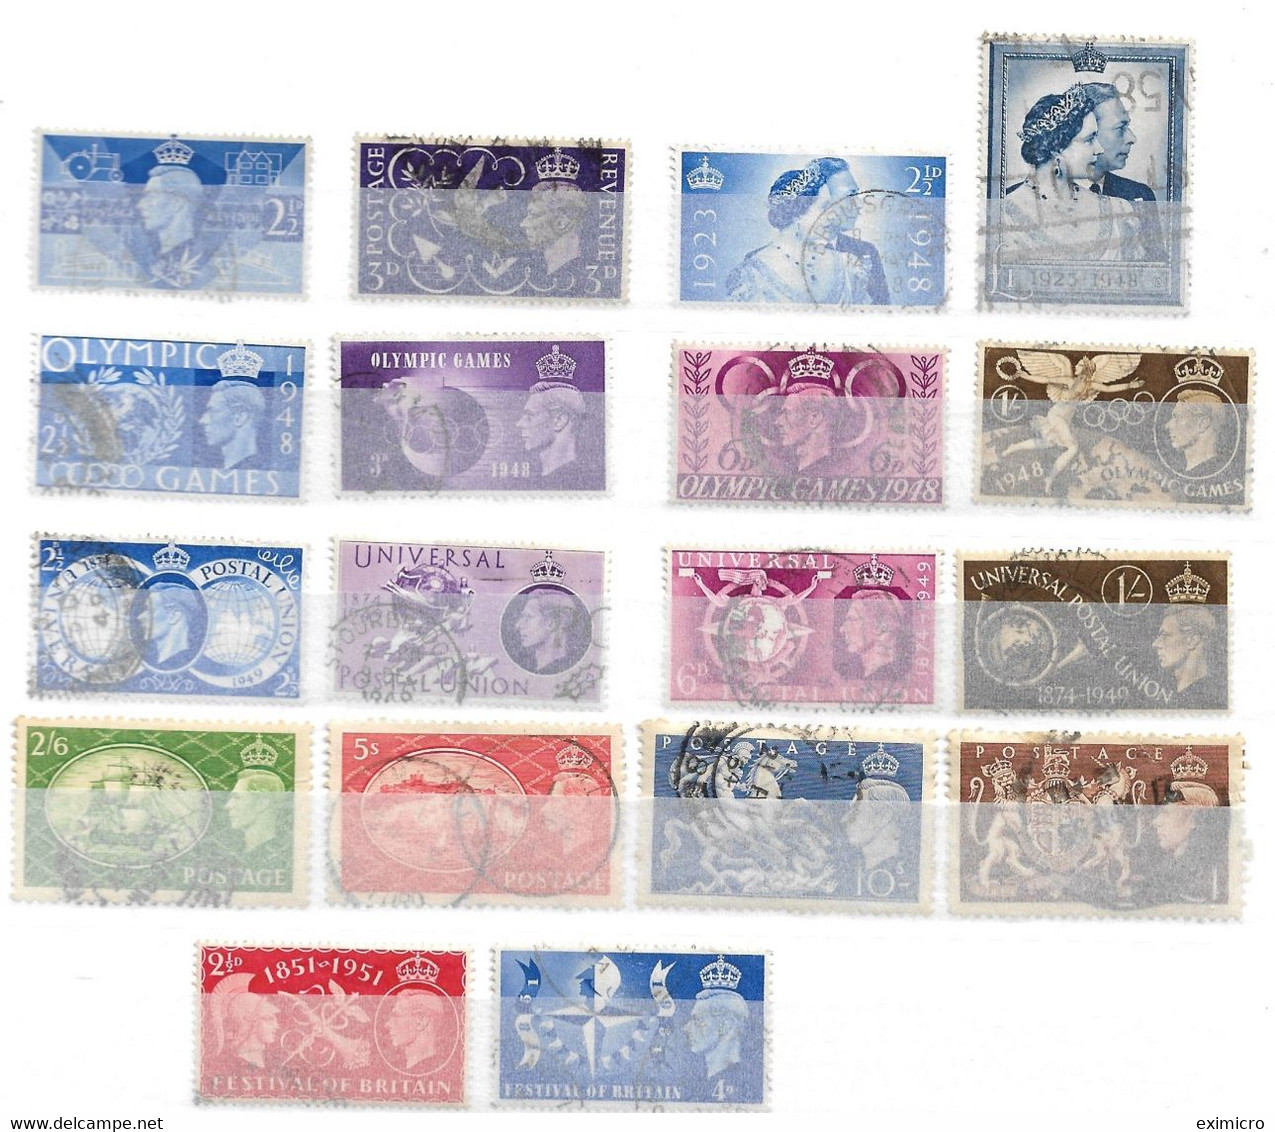 GREAT BRITAIN KING EDWARD VIII + GEORGE VI FINE USED COLLECTION OF SETS ON A DOUBLE-SIDED STOCK SHEET Cat £154+ - Verzamelingen